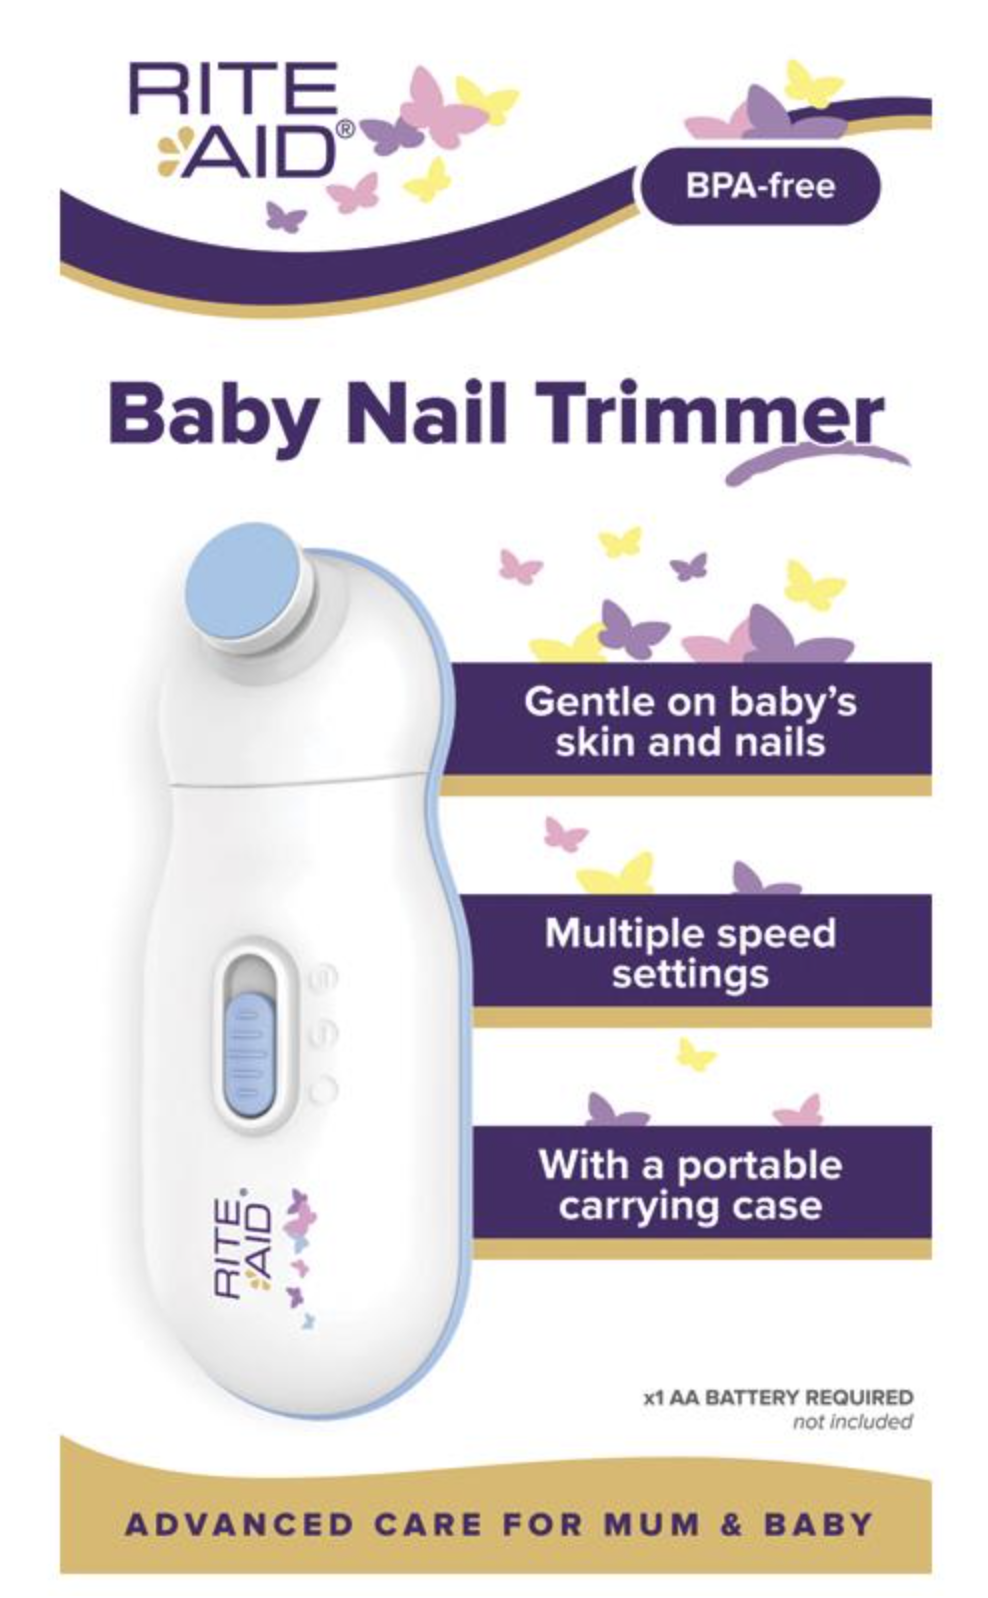 Nail trimmer